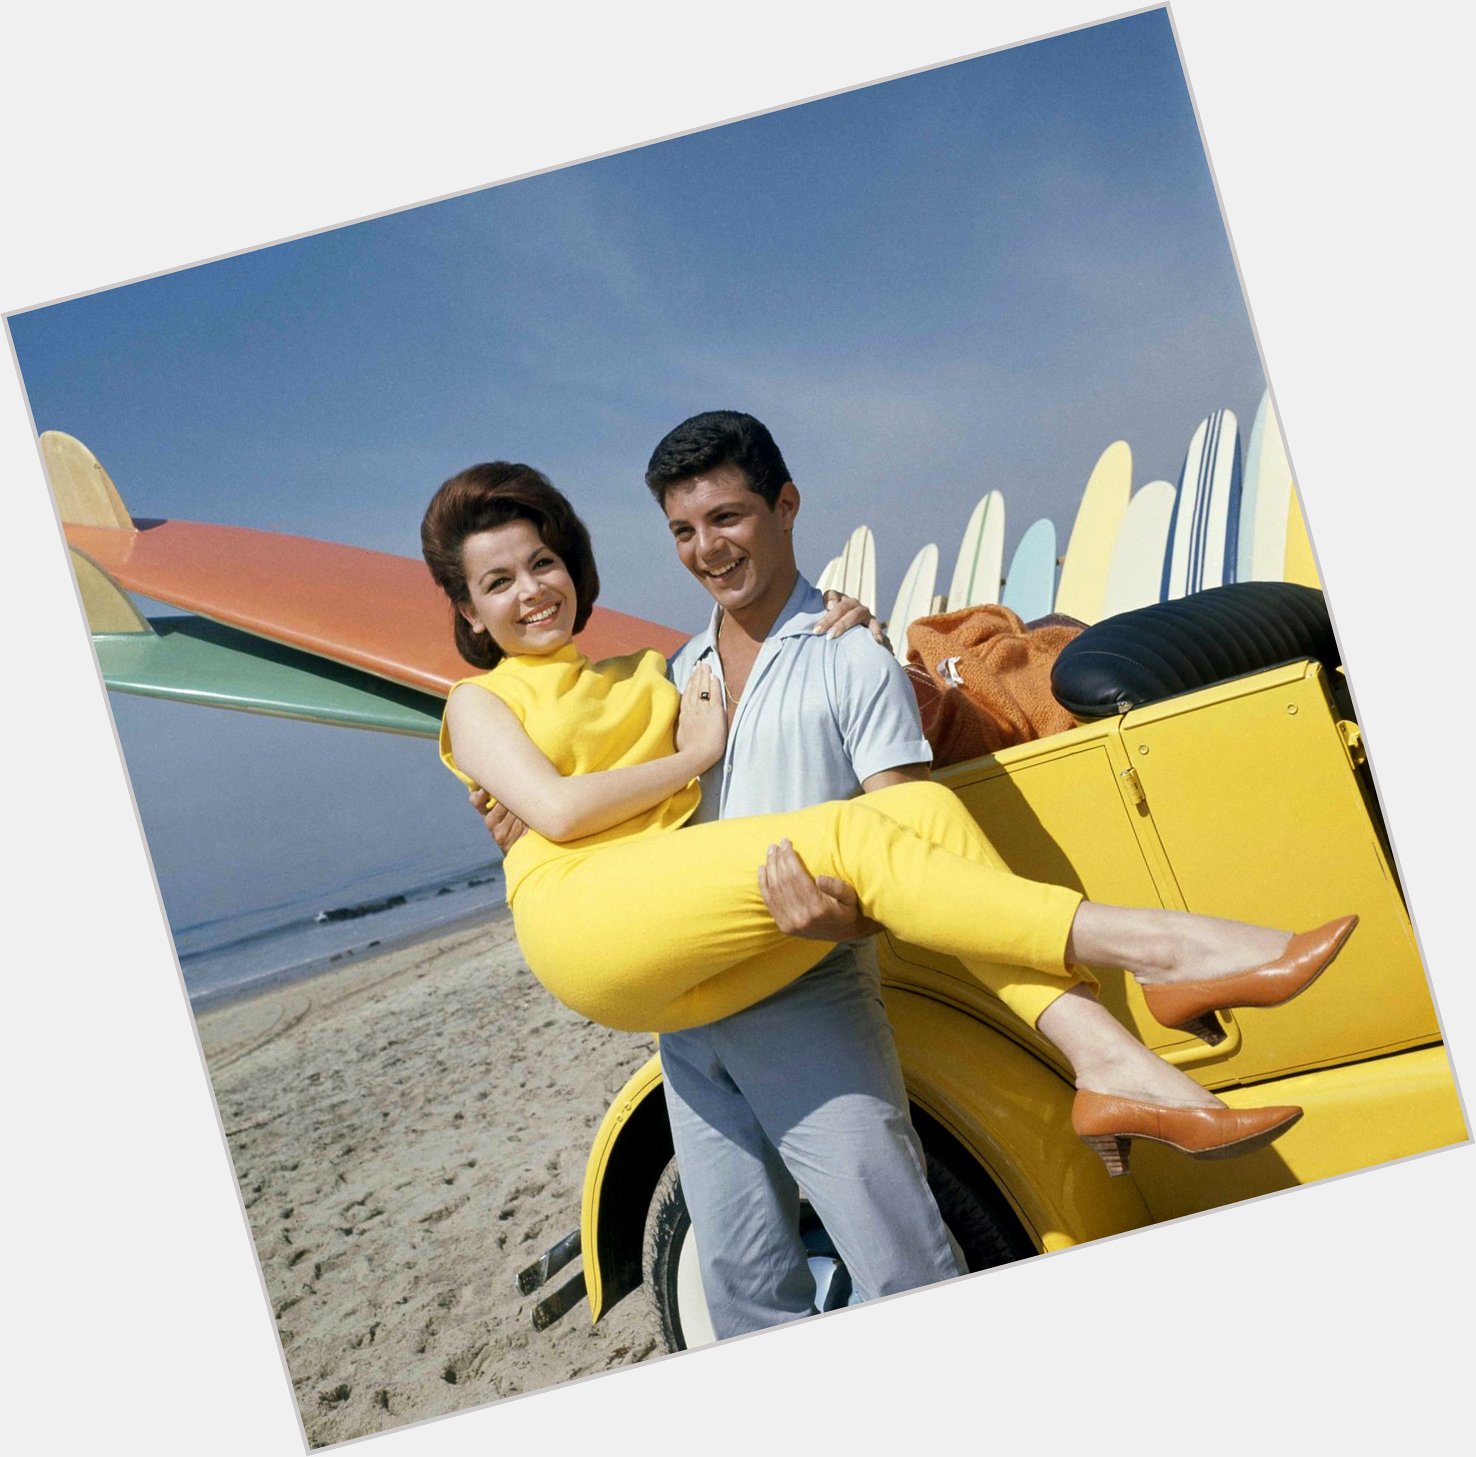 Happy 81st Birthday to Frankie Avalon here with Annette Funicello in Beach Party (1963) 